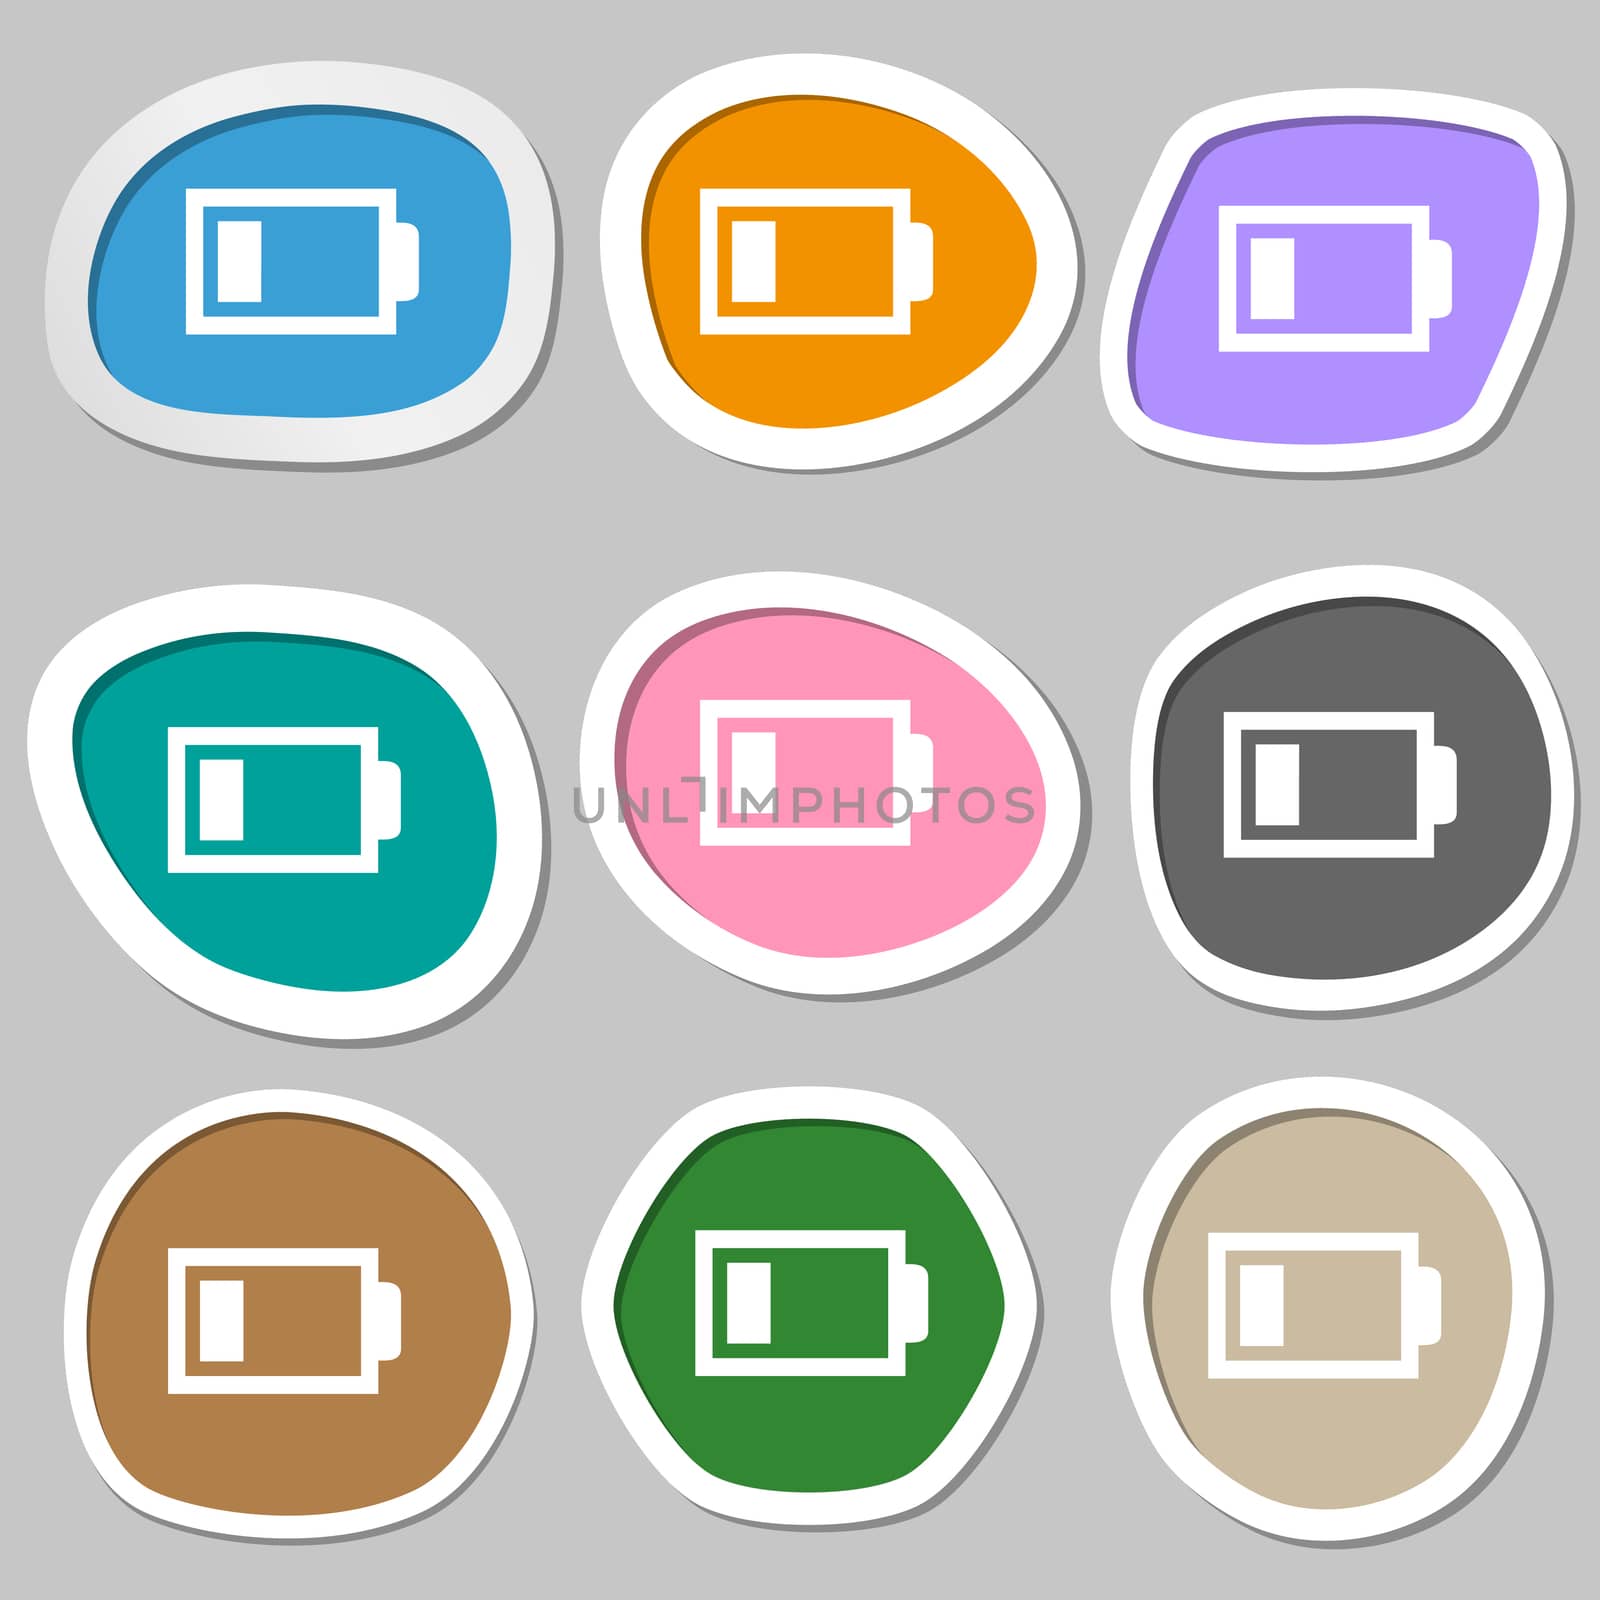 Battery low level sign icon. Electricity symbol. Multicolored paper stickers. illustration